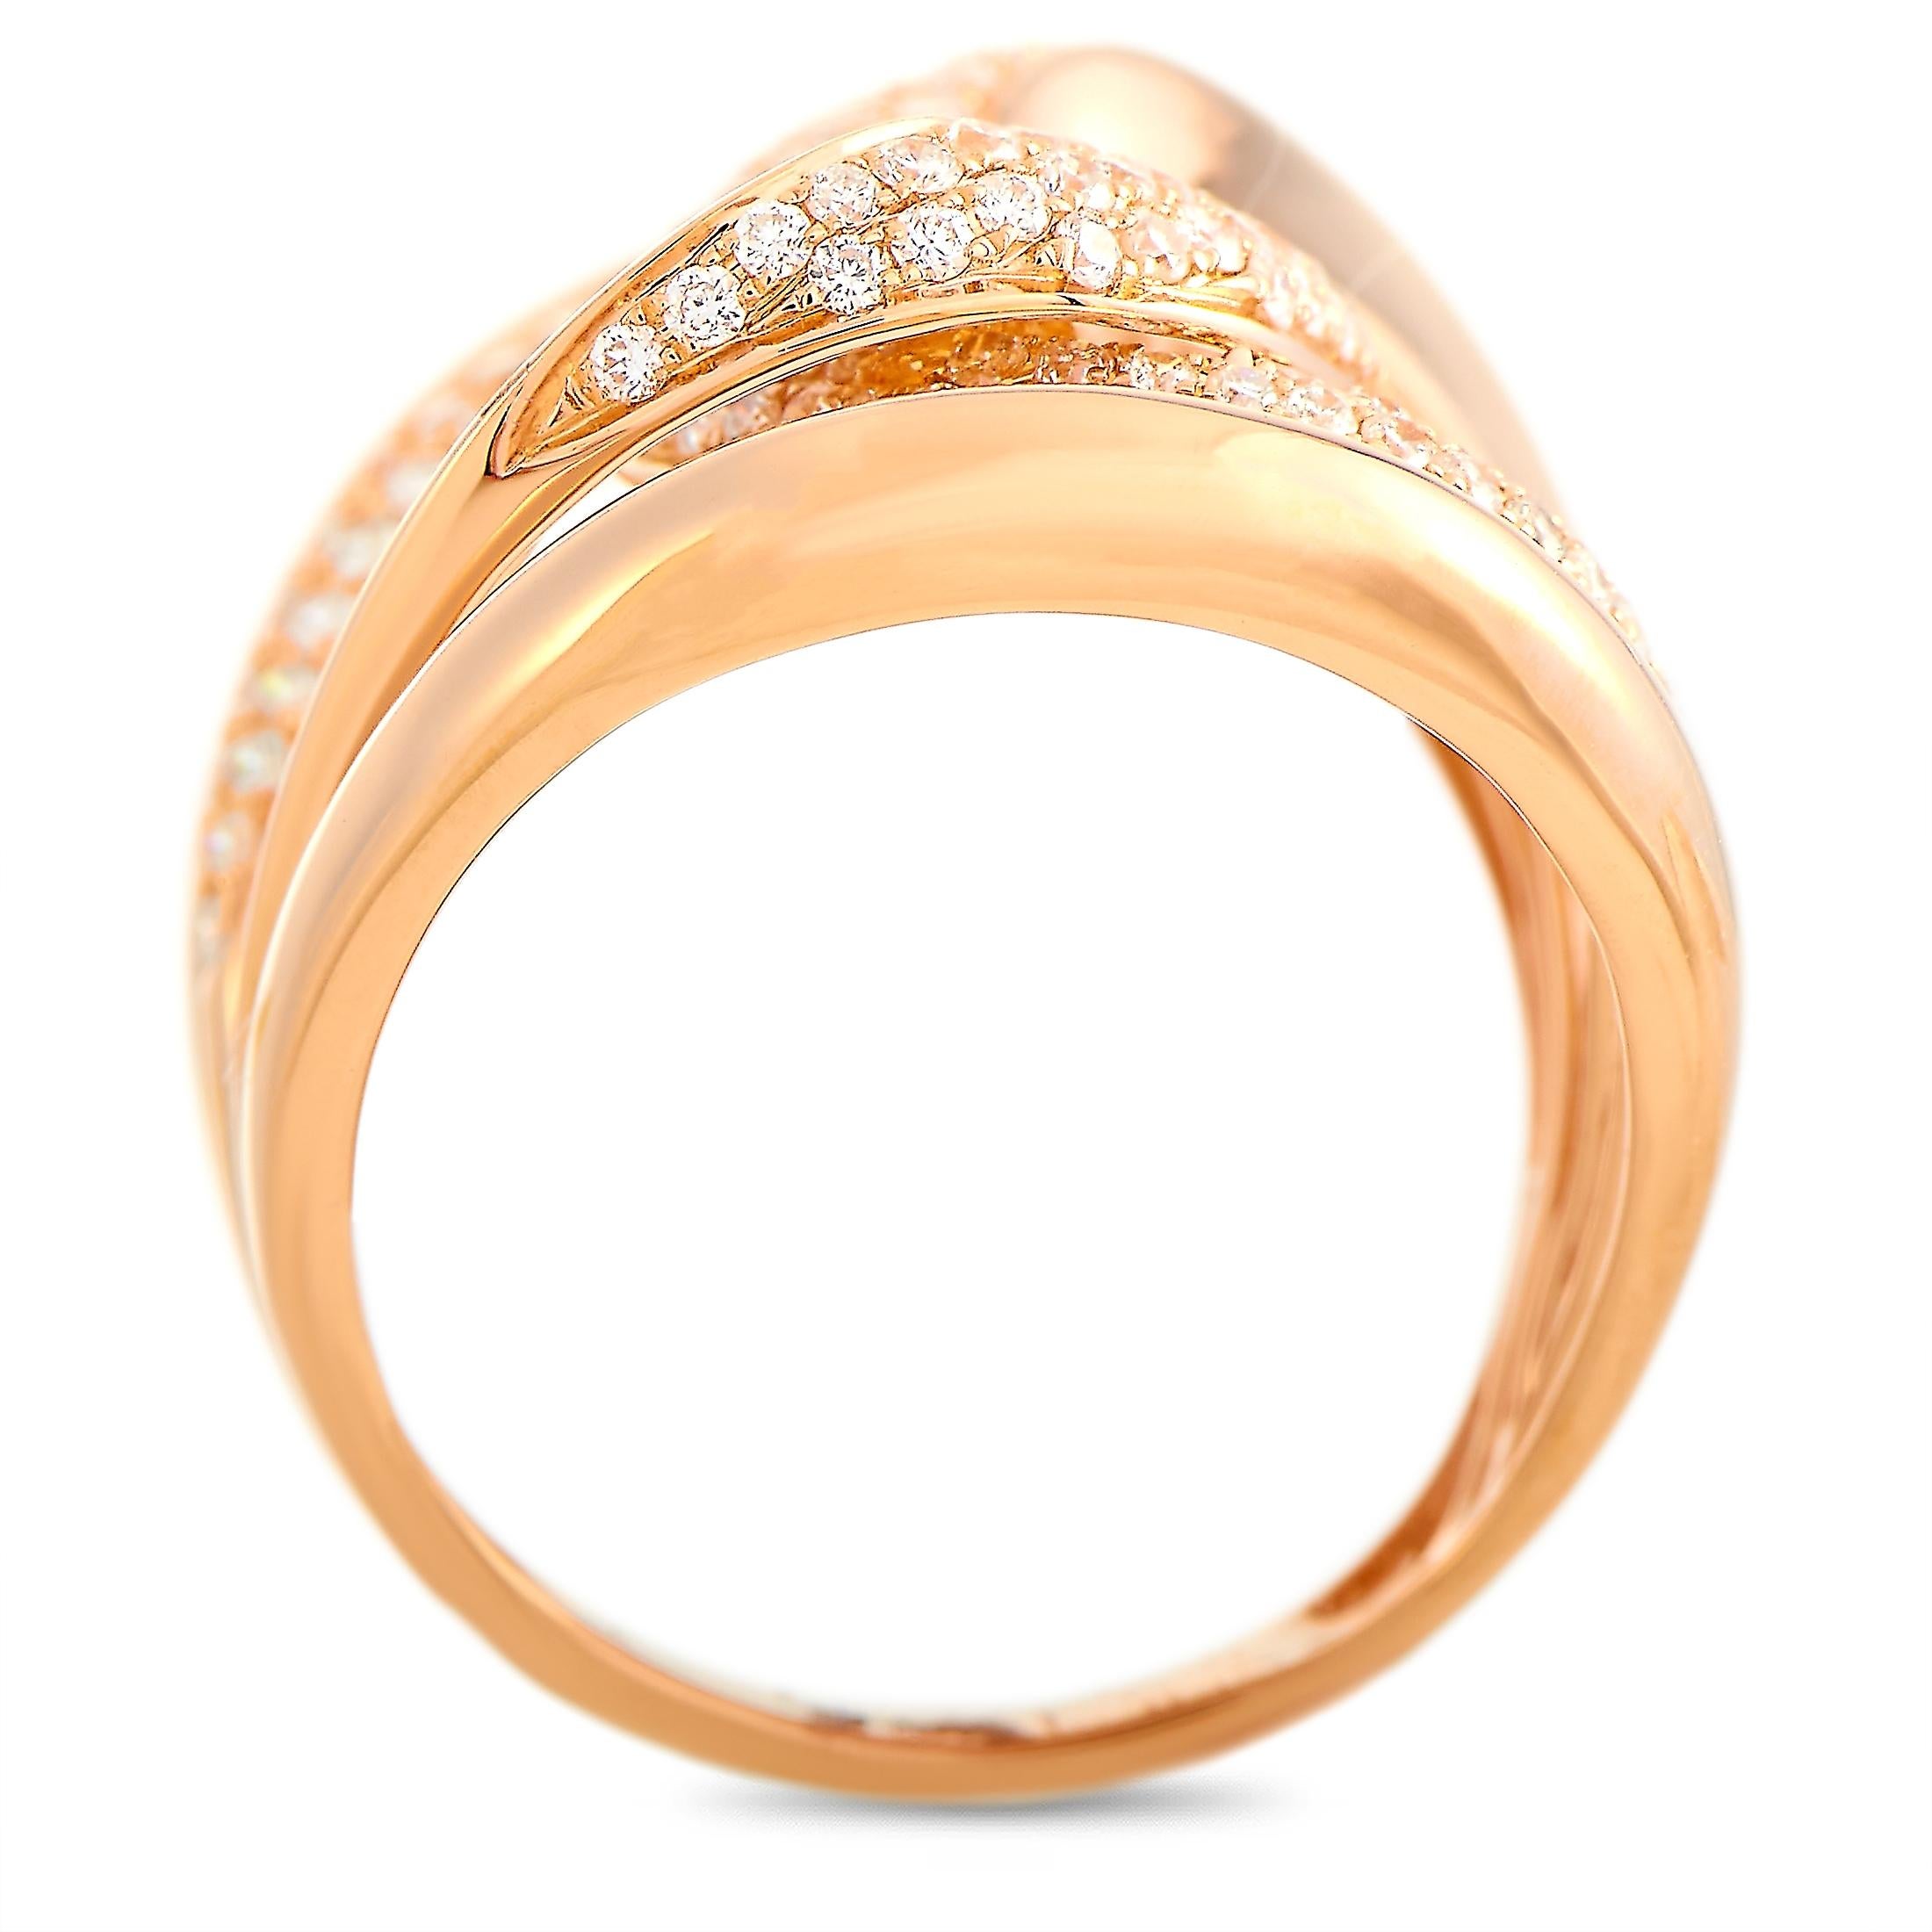 This LB Exclusive ring is made of 18K rose gold and embellished with diamonds that amount to 1.50 carats. The ring weighs 9.5 grams and boasts band thickness of 5 mm and top height of 3 mm, while top dimensions measure 30 by 20 mm.
 
 Offered in